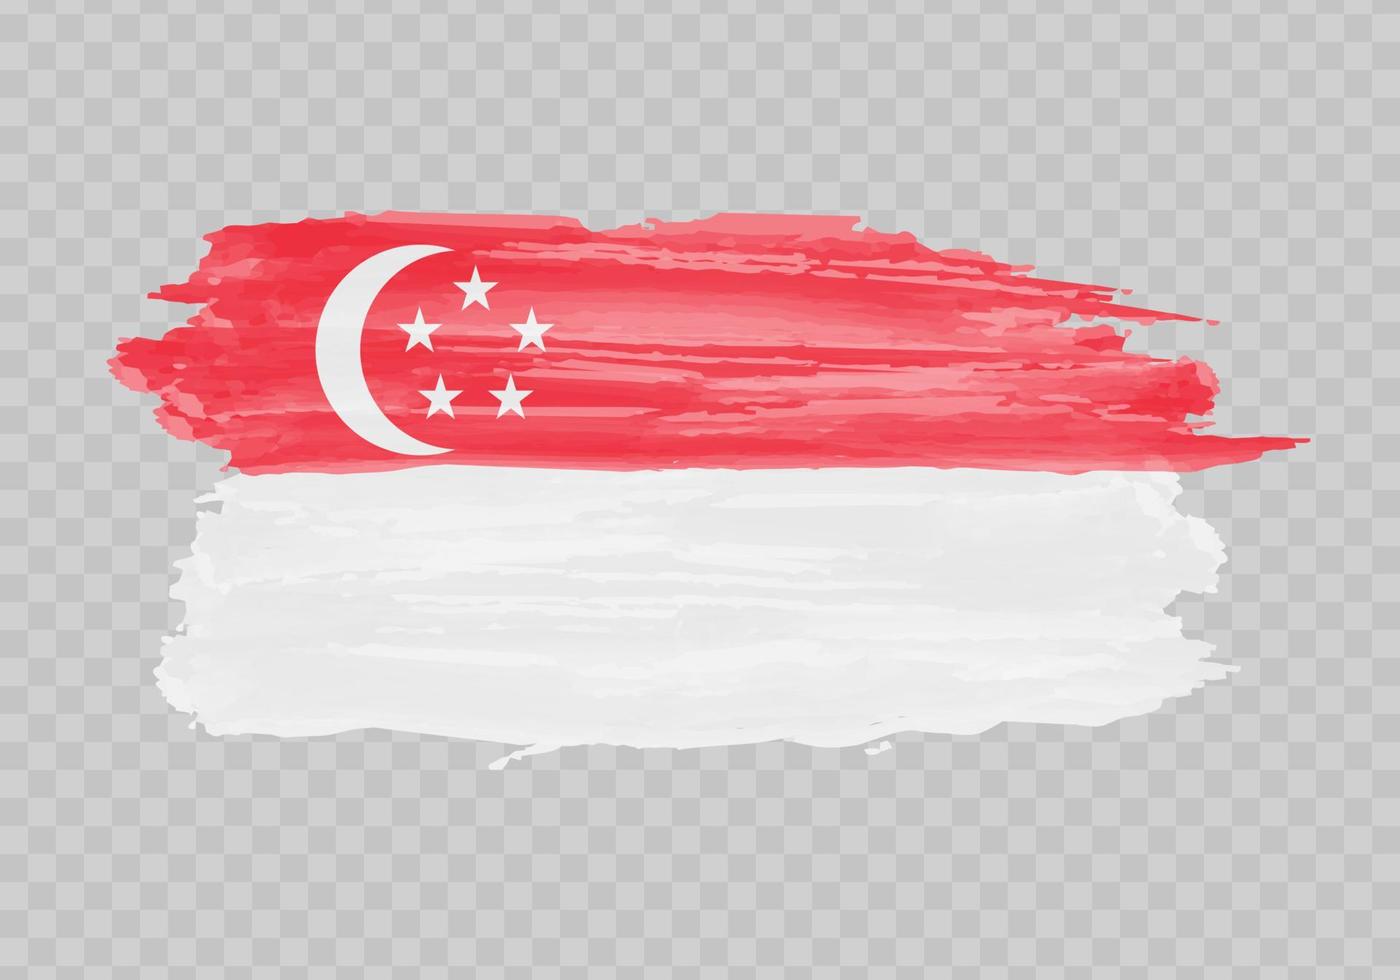 Watercolor painting flag of Singapore vector